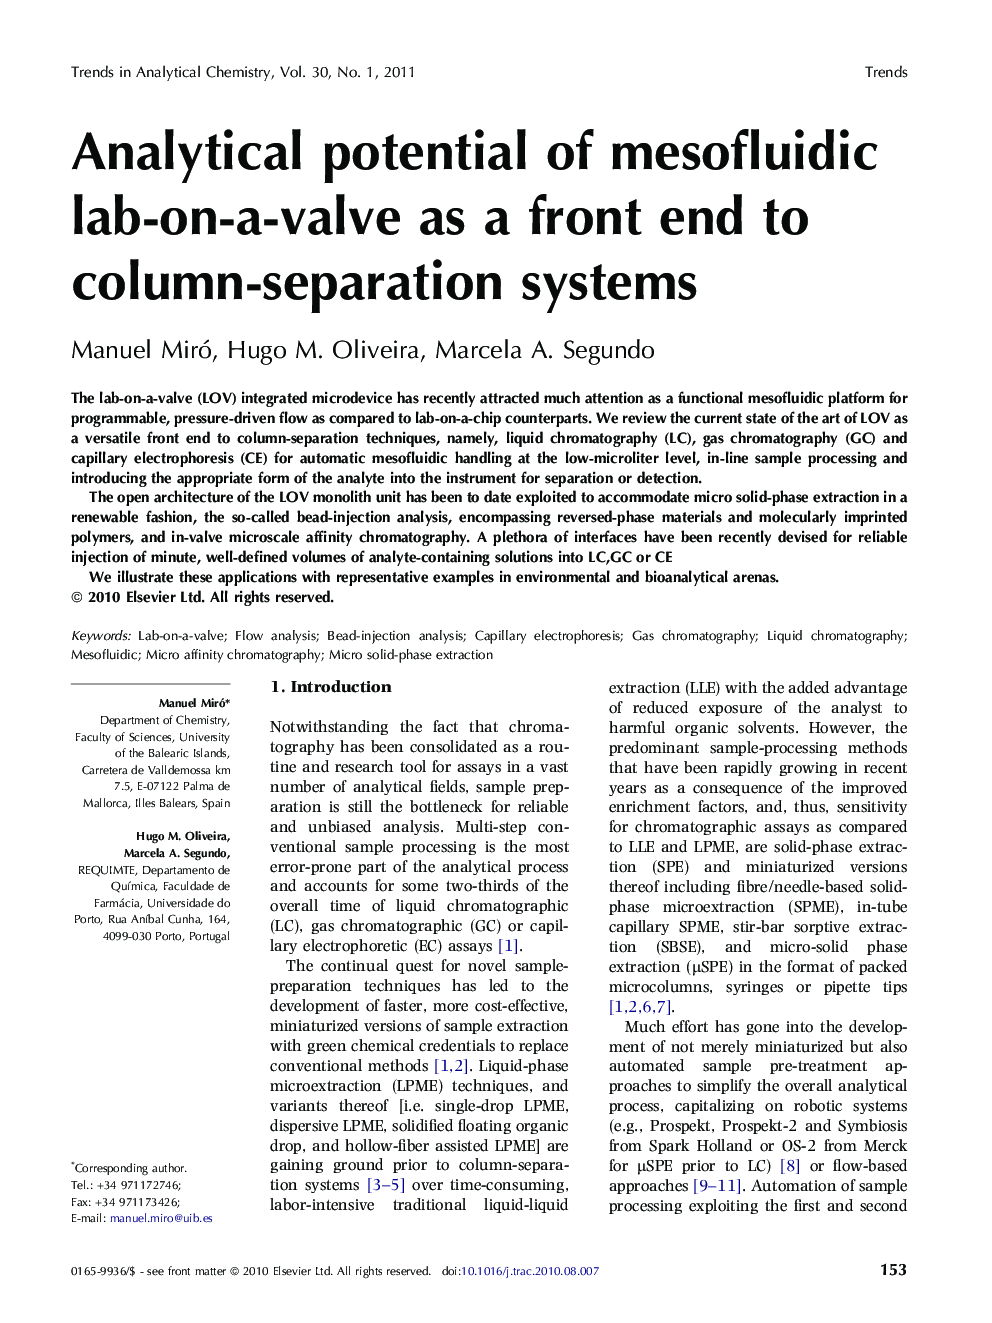 Analytical potential of mesofluidic lab-on-a-valve as a front end to column-separation systems